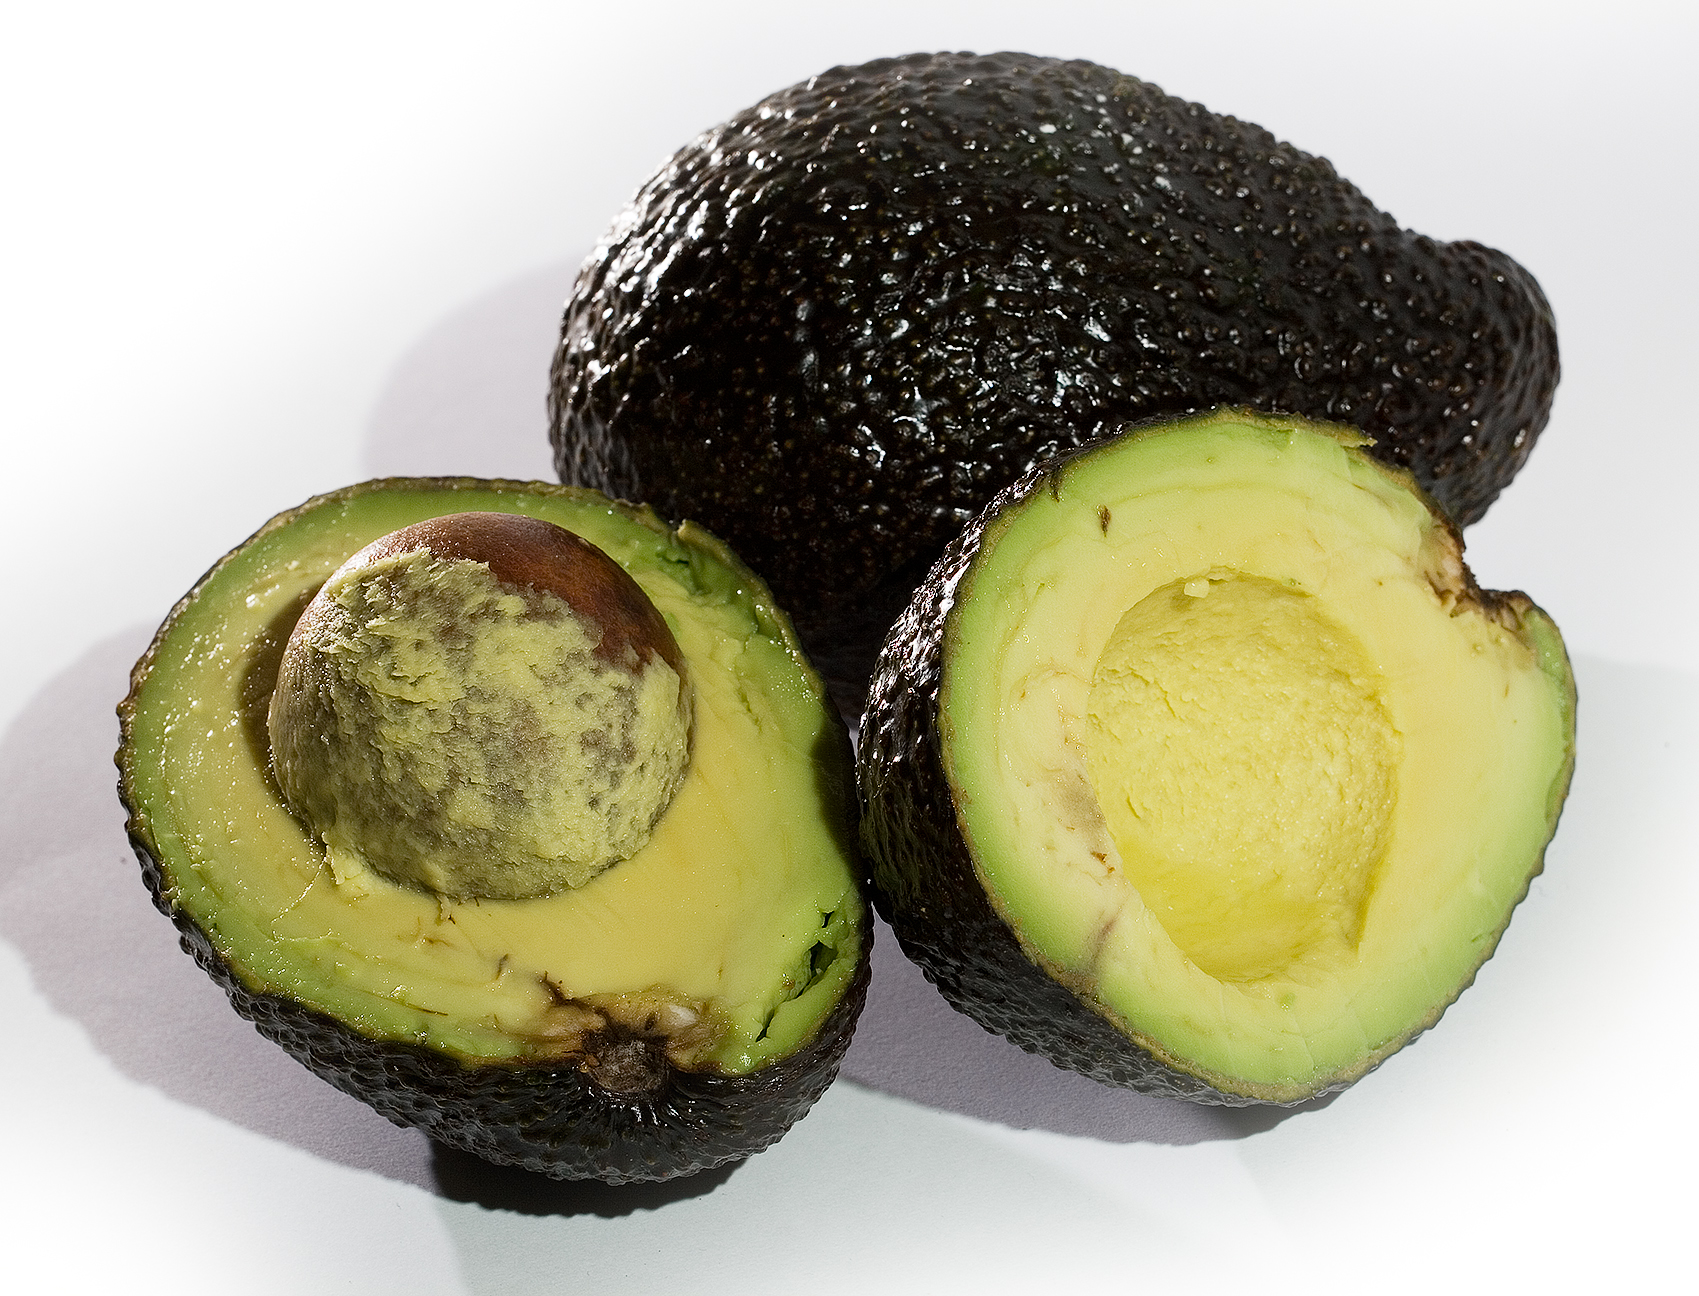 File:Animated avocado with pit.gif - Wikimedia Commons